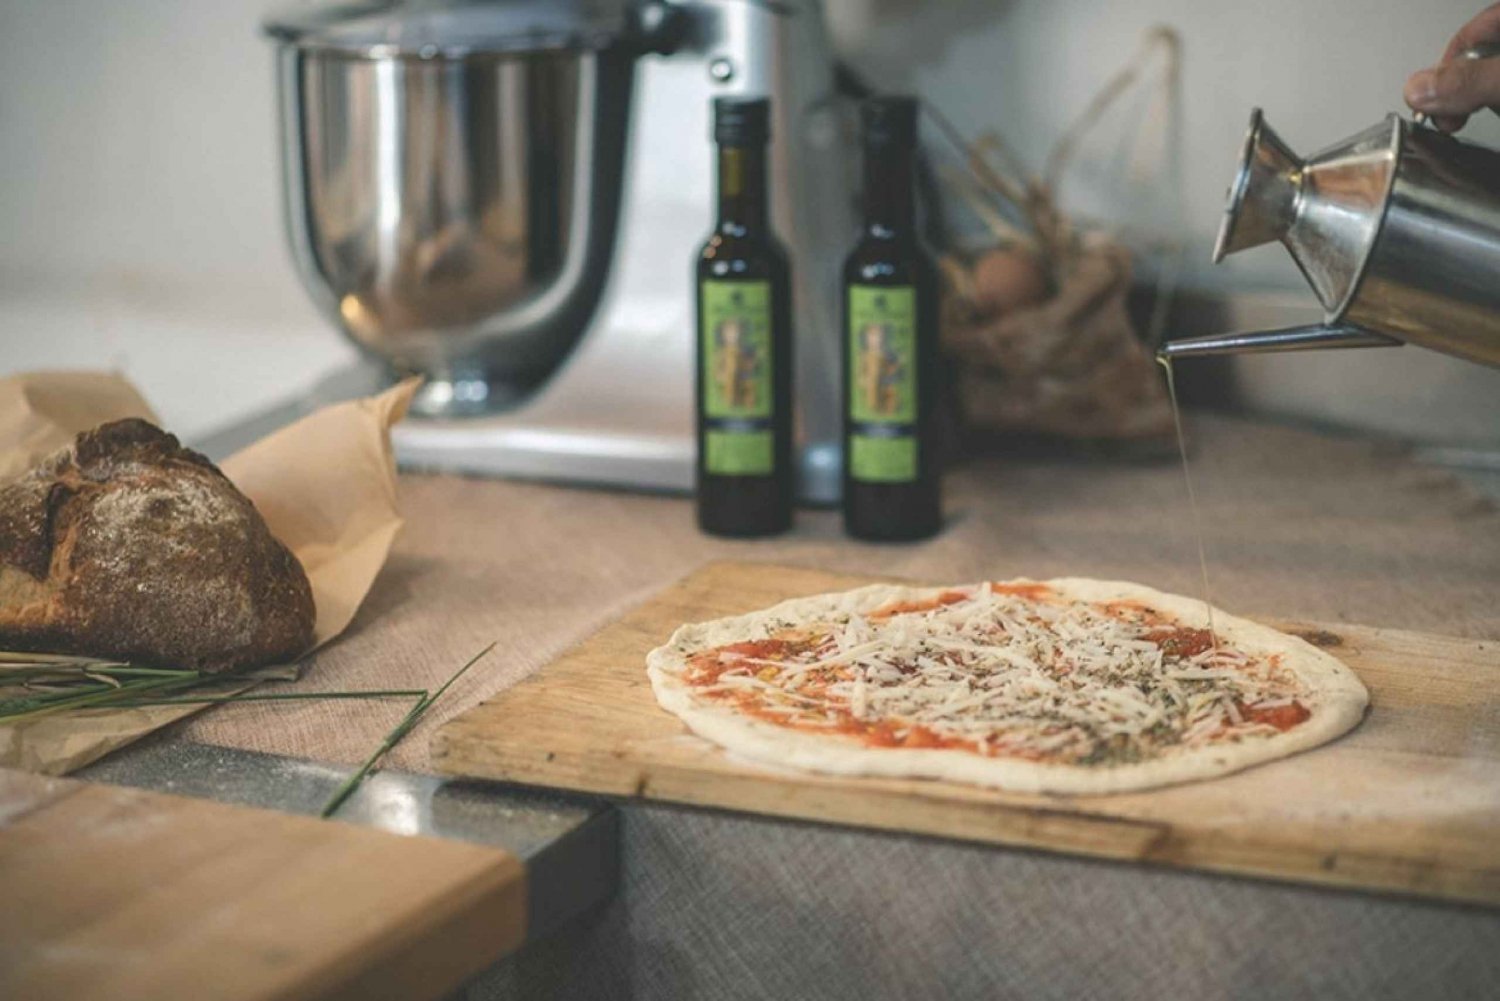 Partinico: Pizza-Making Class on an Organic Farm with Wine